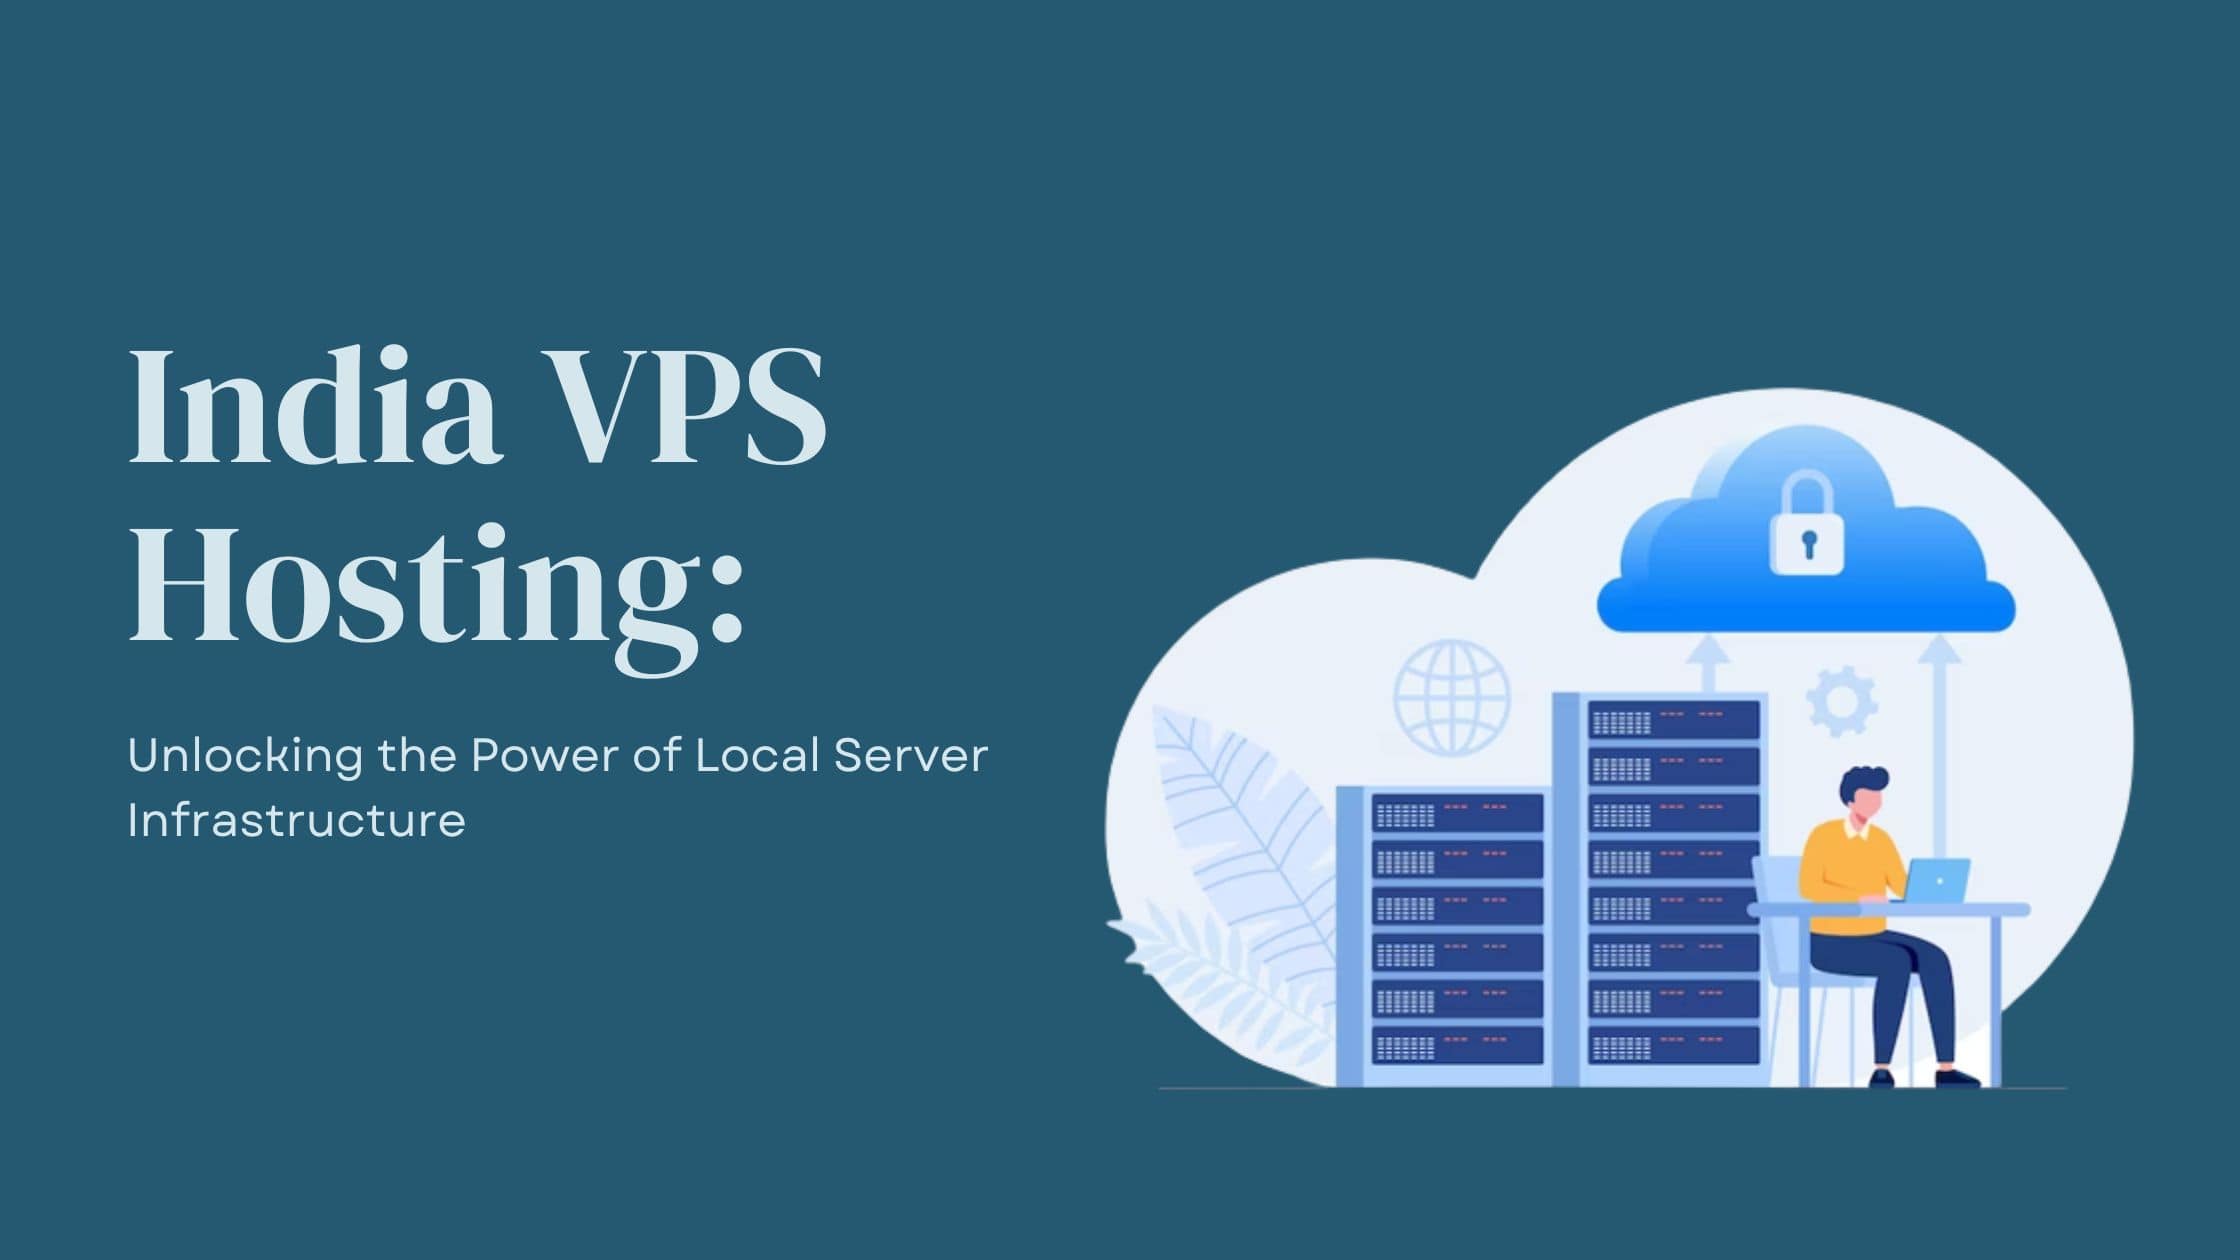 India VPS Hosting Unlocking the Power of Local Server Infrastructure